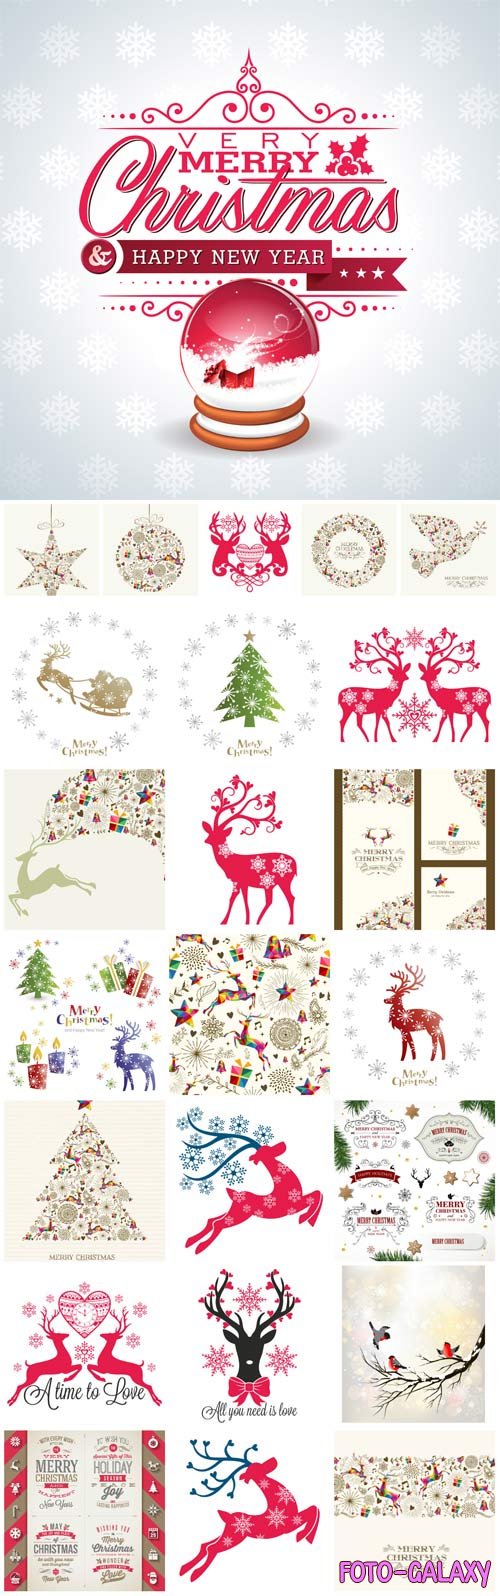 New Year and Christmas illustrations in vector 3